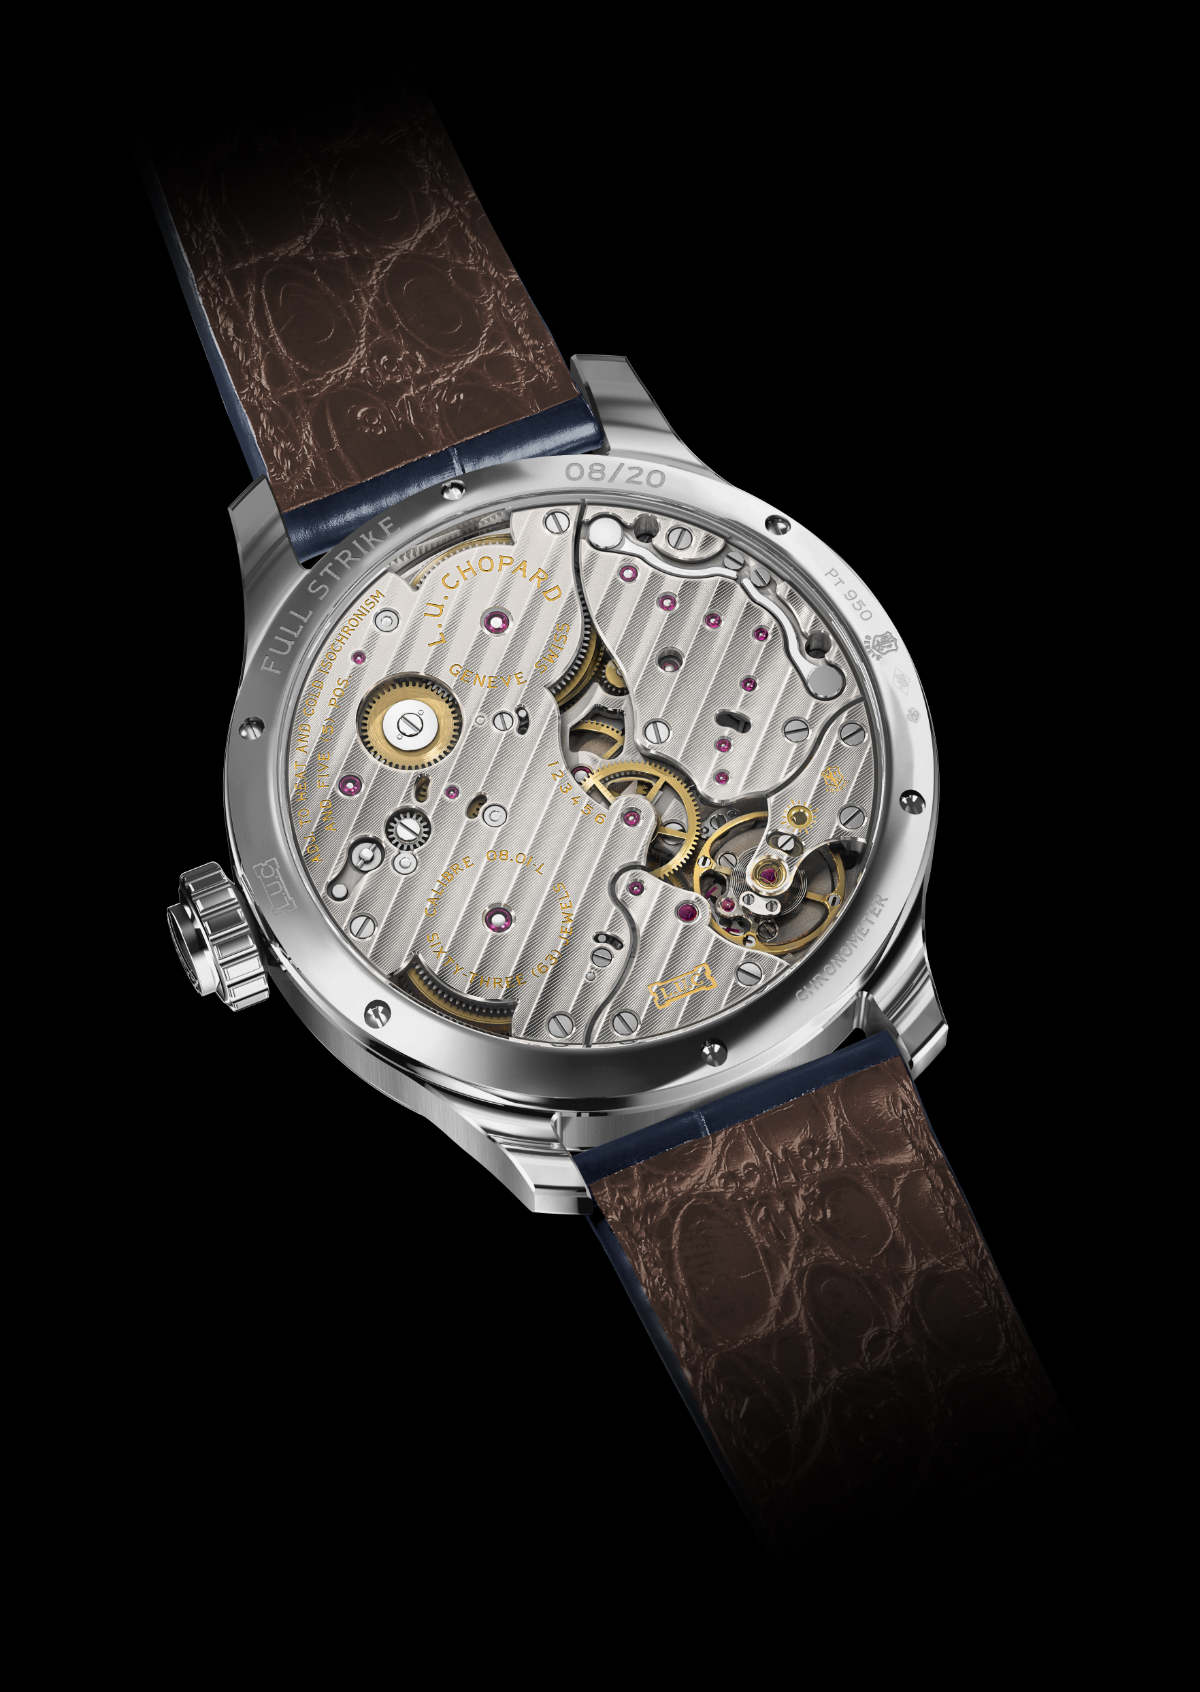 L.U.C Full Strike: A New Platinum Limited Edition For The Crystal-clear Minute Repeater By Chopard